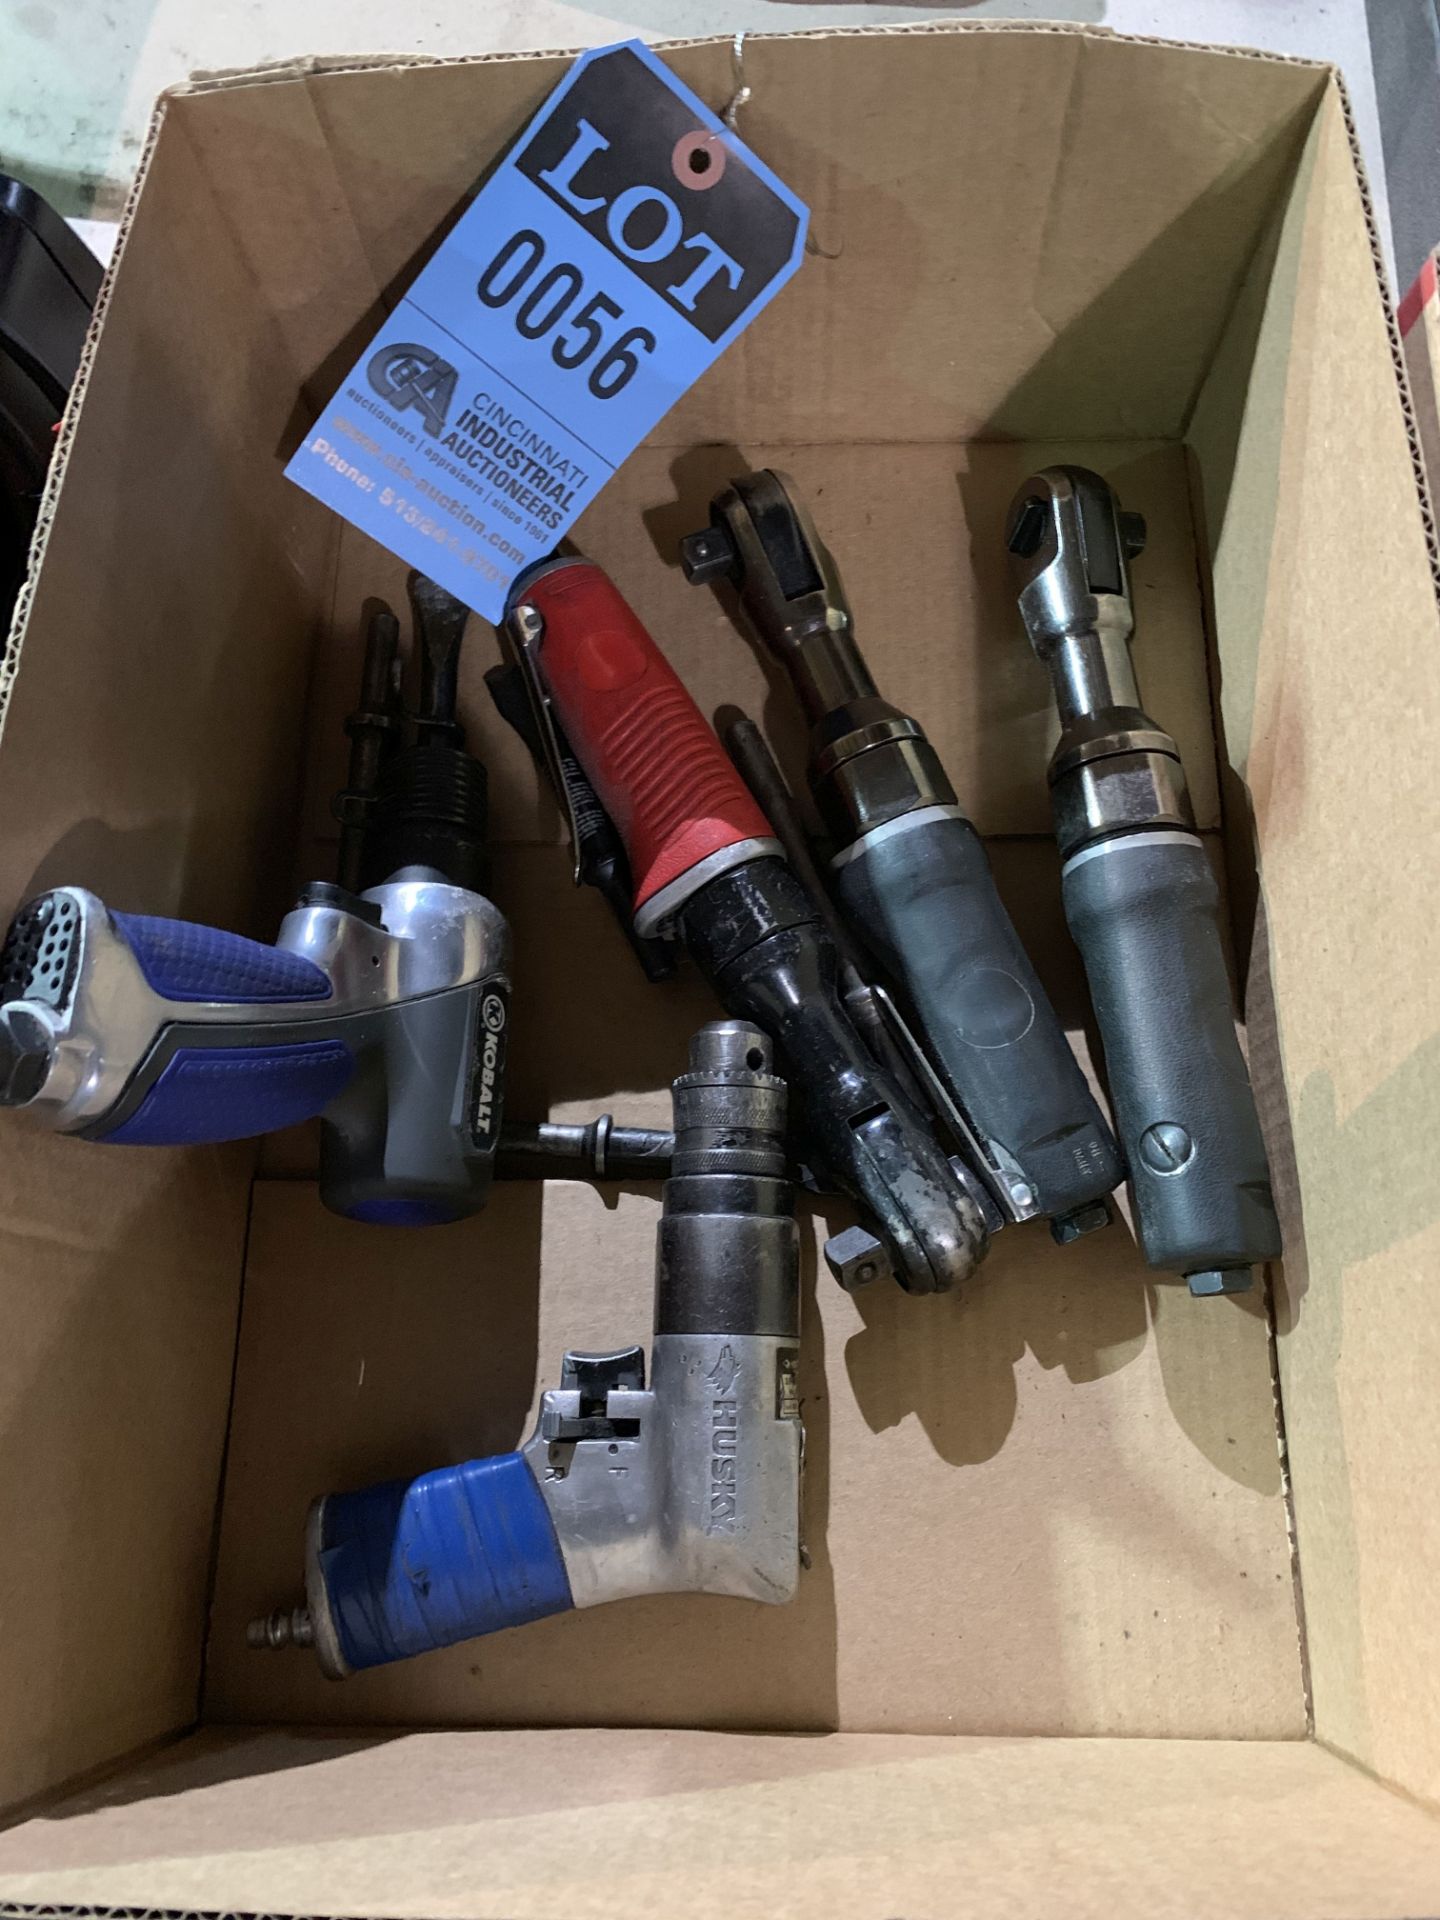 (LOT) (5) PNEUMATIC HAND TOOLS - (3) RATCHETS, (1) CHISEL GUN, (1) DRILL - BY KOBALT AND HUSKY **